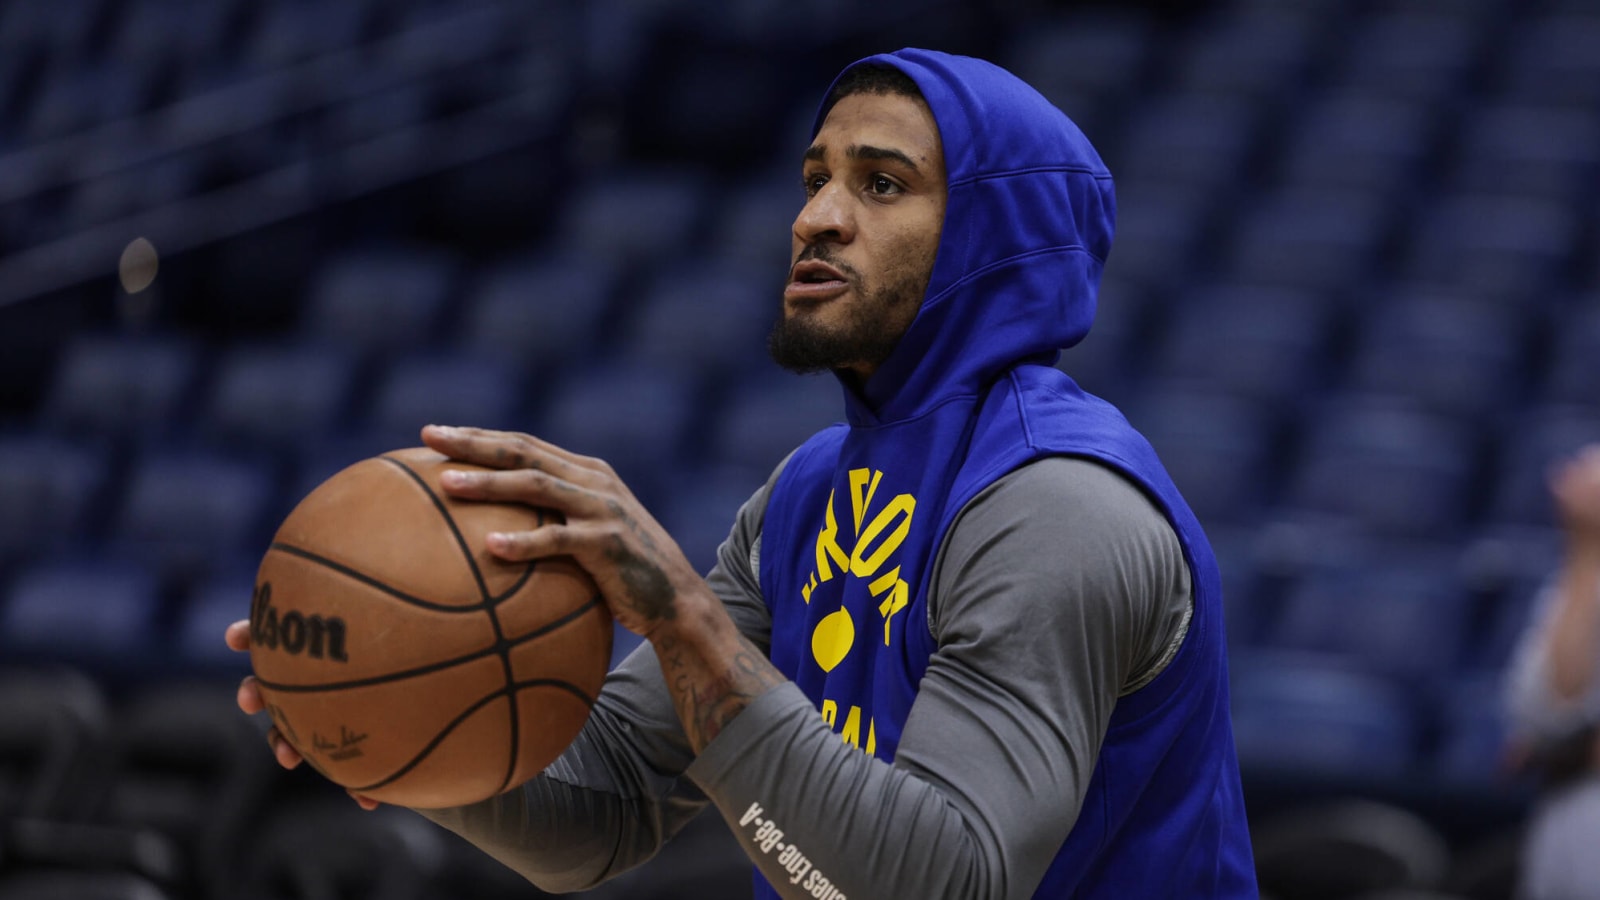 Gary Payton II signs with Blazers on three-year, $28M deal